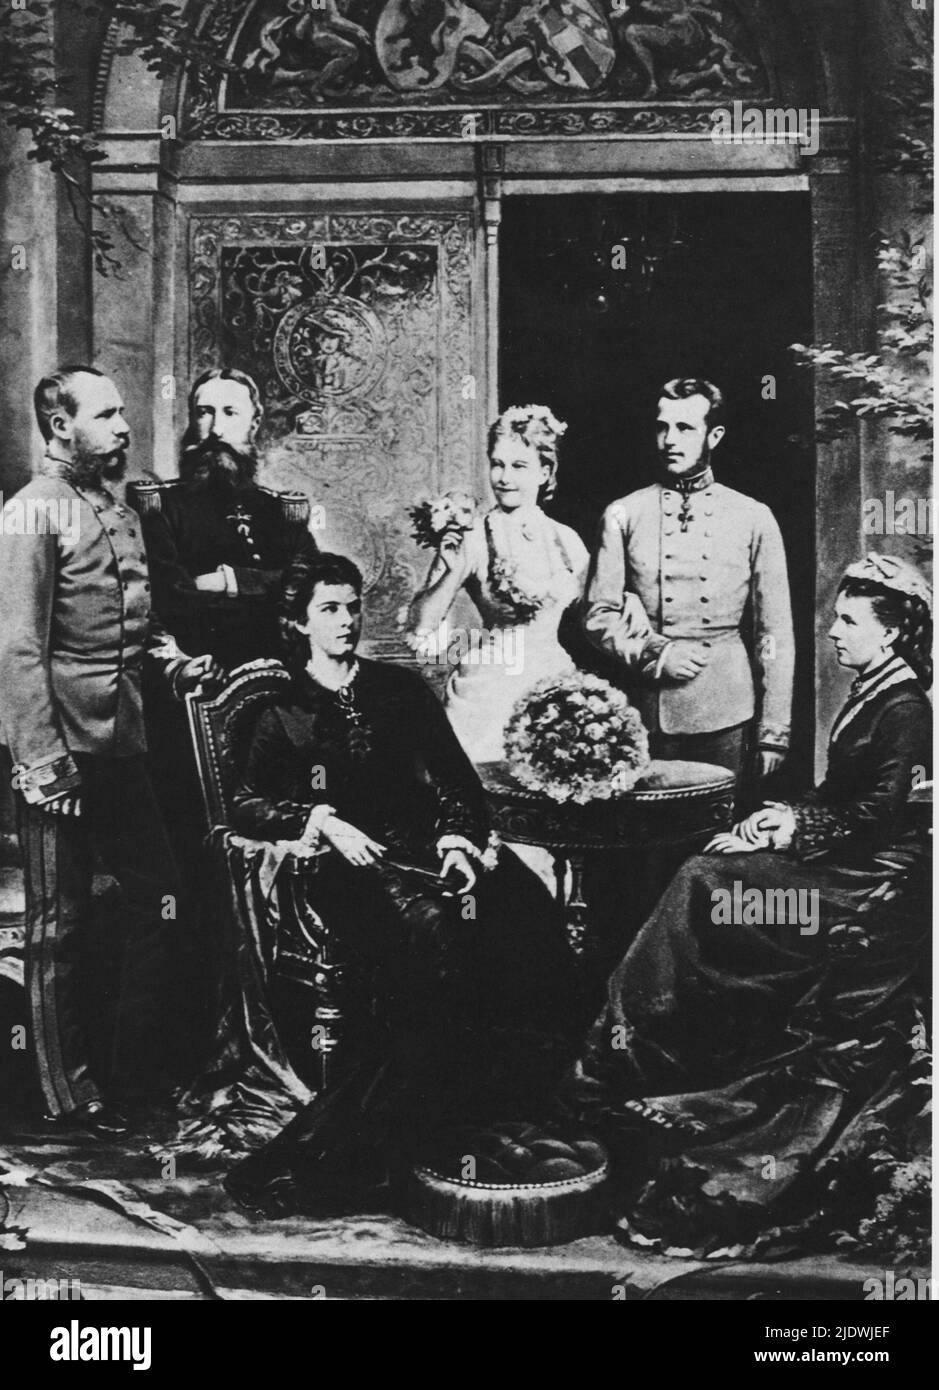 1880  , Wien , Austria   : The  official engagement picture of Crown Prince RUDOLF of AUSTRIA ( 1850 - Mayerling 1889 )  and Princesse  STEPHANIE of BELGIUM ( 1864 - 1945 ). In the picture the parents of husband  : the  austrian  Empress Elisabeth of HABSBURG   ( SISSI von Wittelsbach  , 1937 - 1898 ) and Kaiser Franz Josef ( 1830 - 1916 ) , Emperor of Austria , King of Hungary and Bohemia .  And the parents of future wife : the King  LEOPOLD II of Belgium ( 1835 - 1909 ) and Archduchess MARIE HENRIETTE of AUSTRIA ( 1836 - 1902 )  - FRANCESCO GIUSEPPE - JOSEPH - ABSBURG - ASBURG - ASBURGO - NO Stock Photo